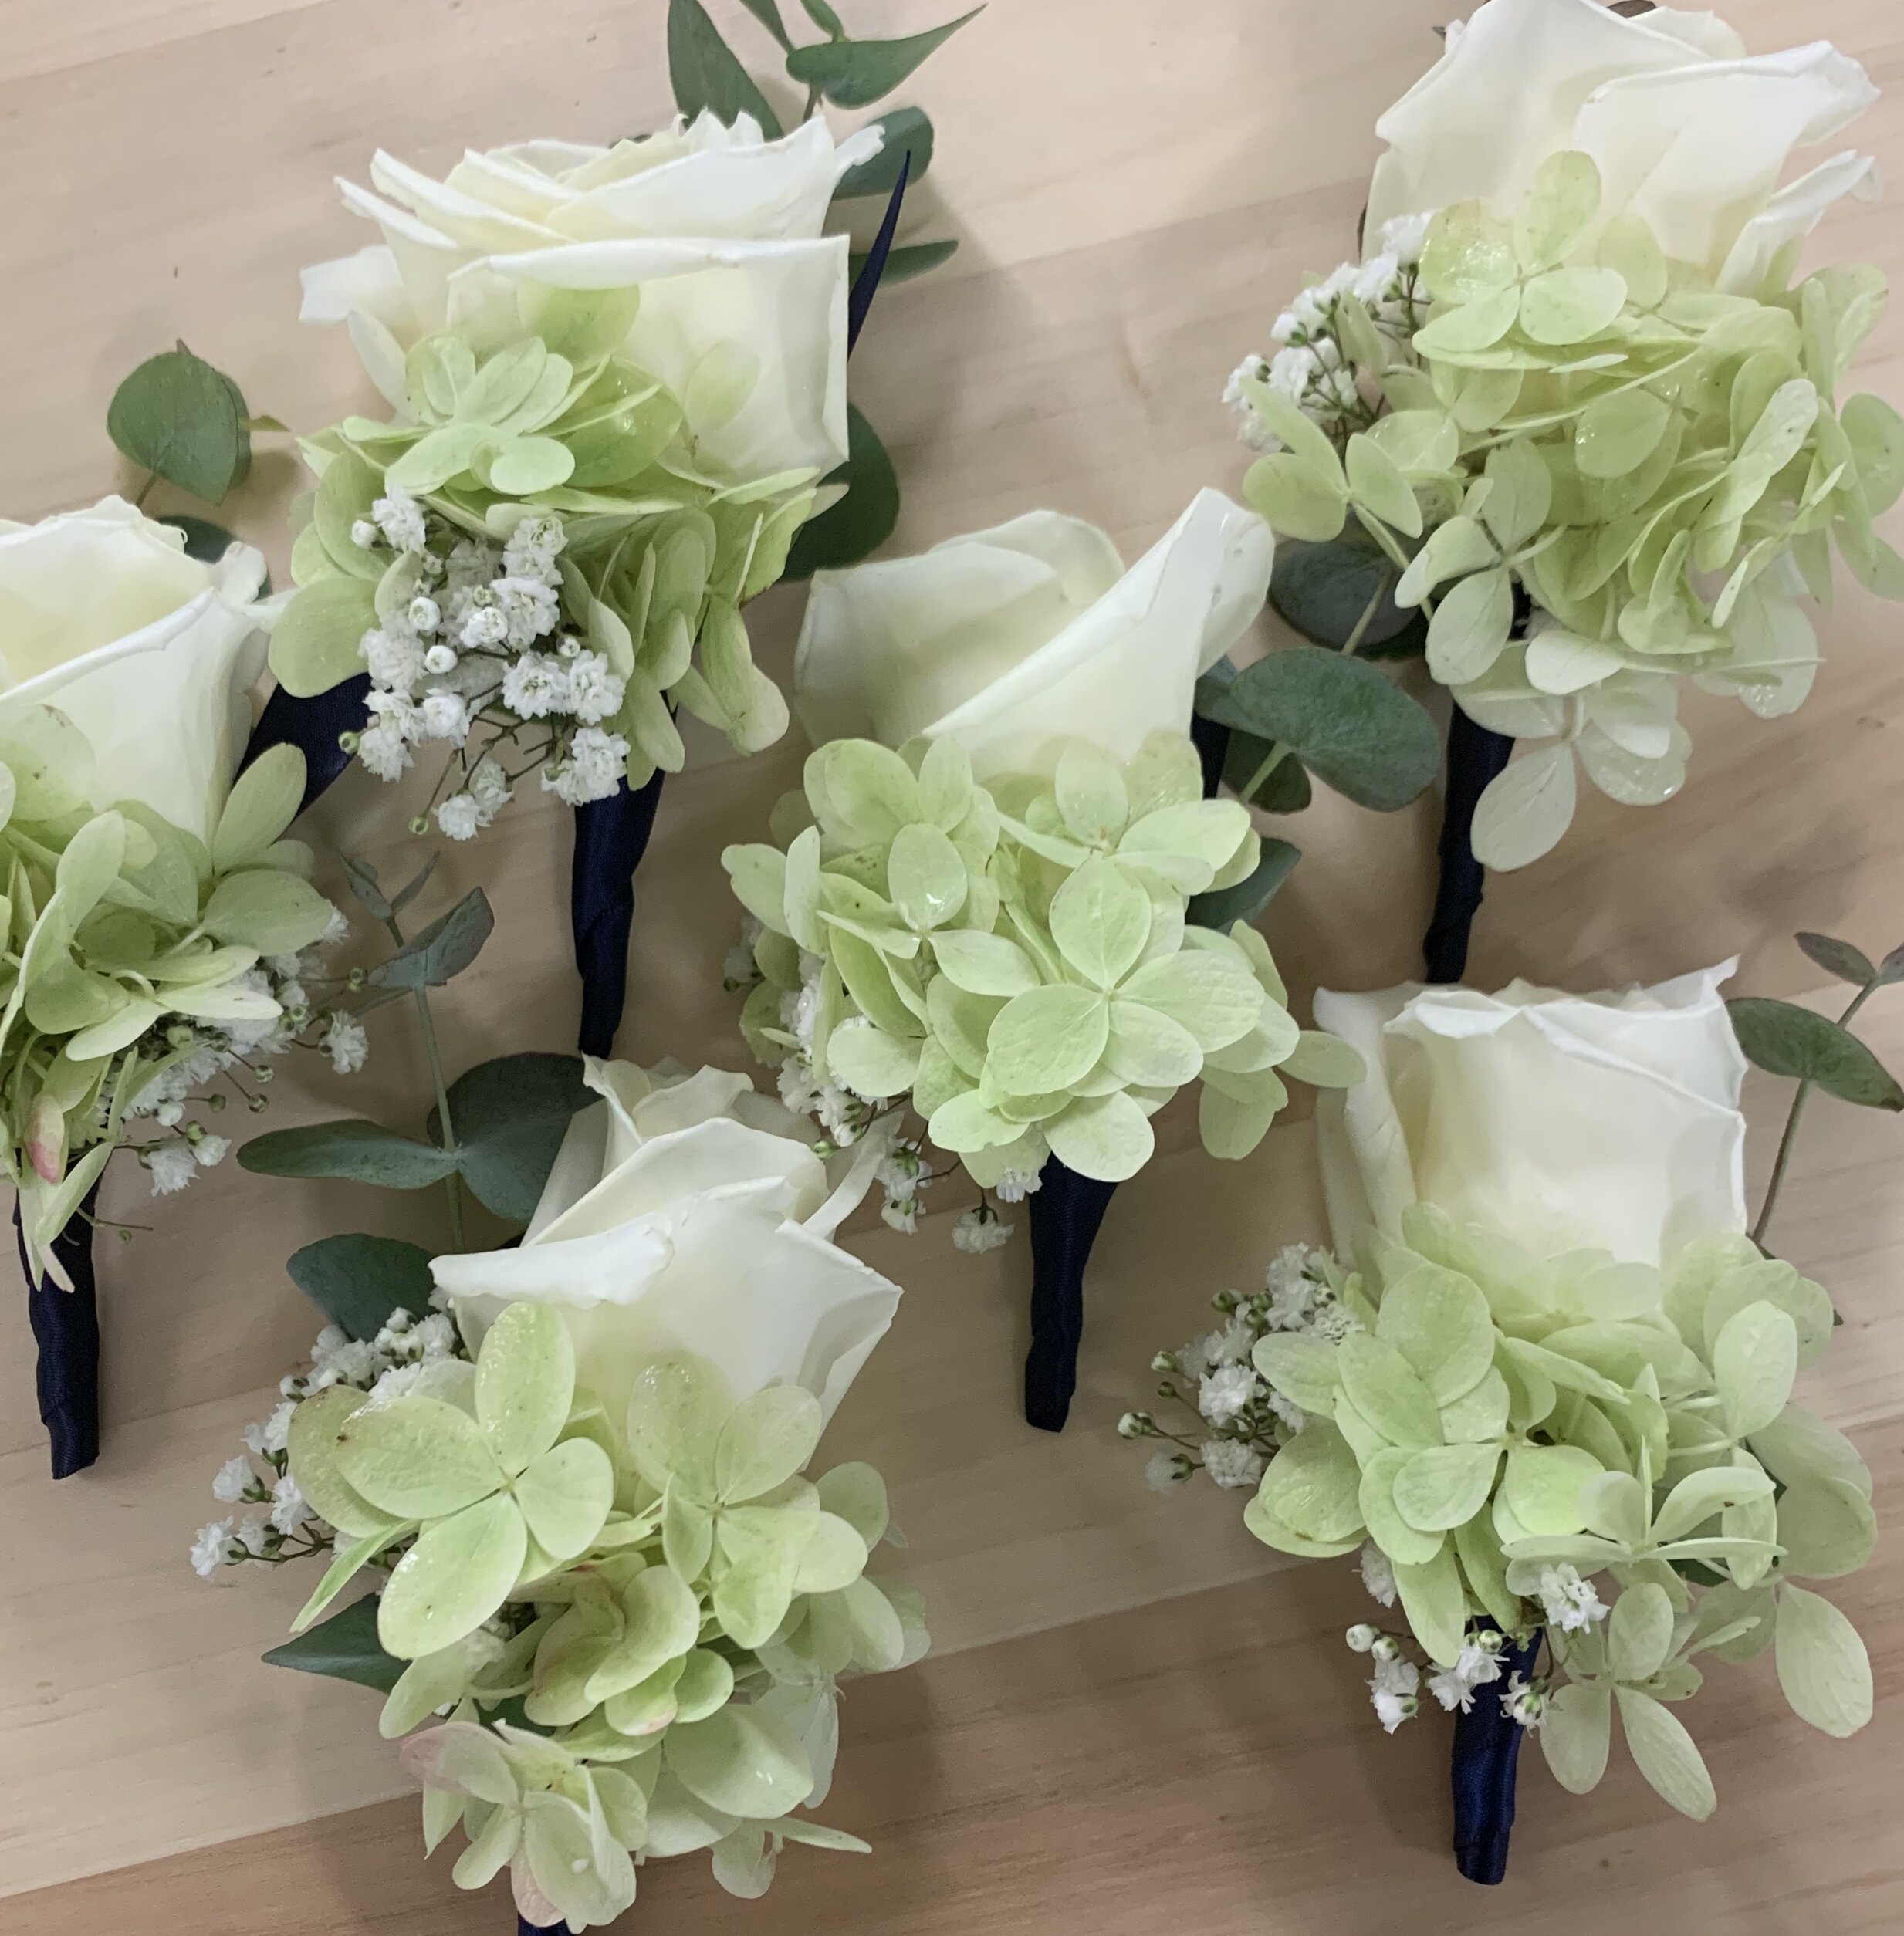 Rose and Limelight Hydrangea Boutonniere.jpg